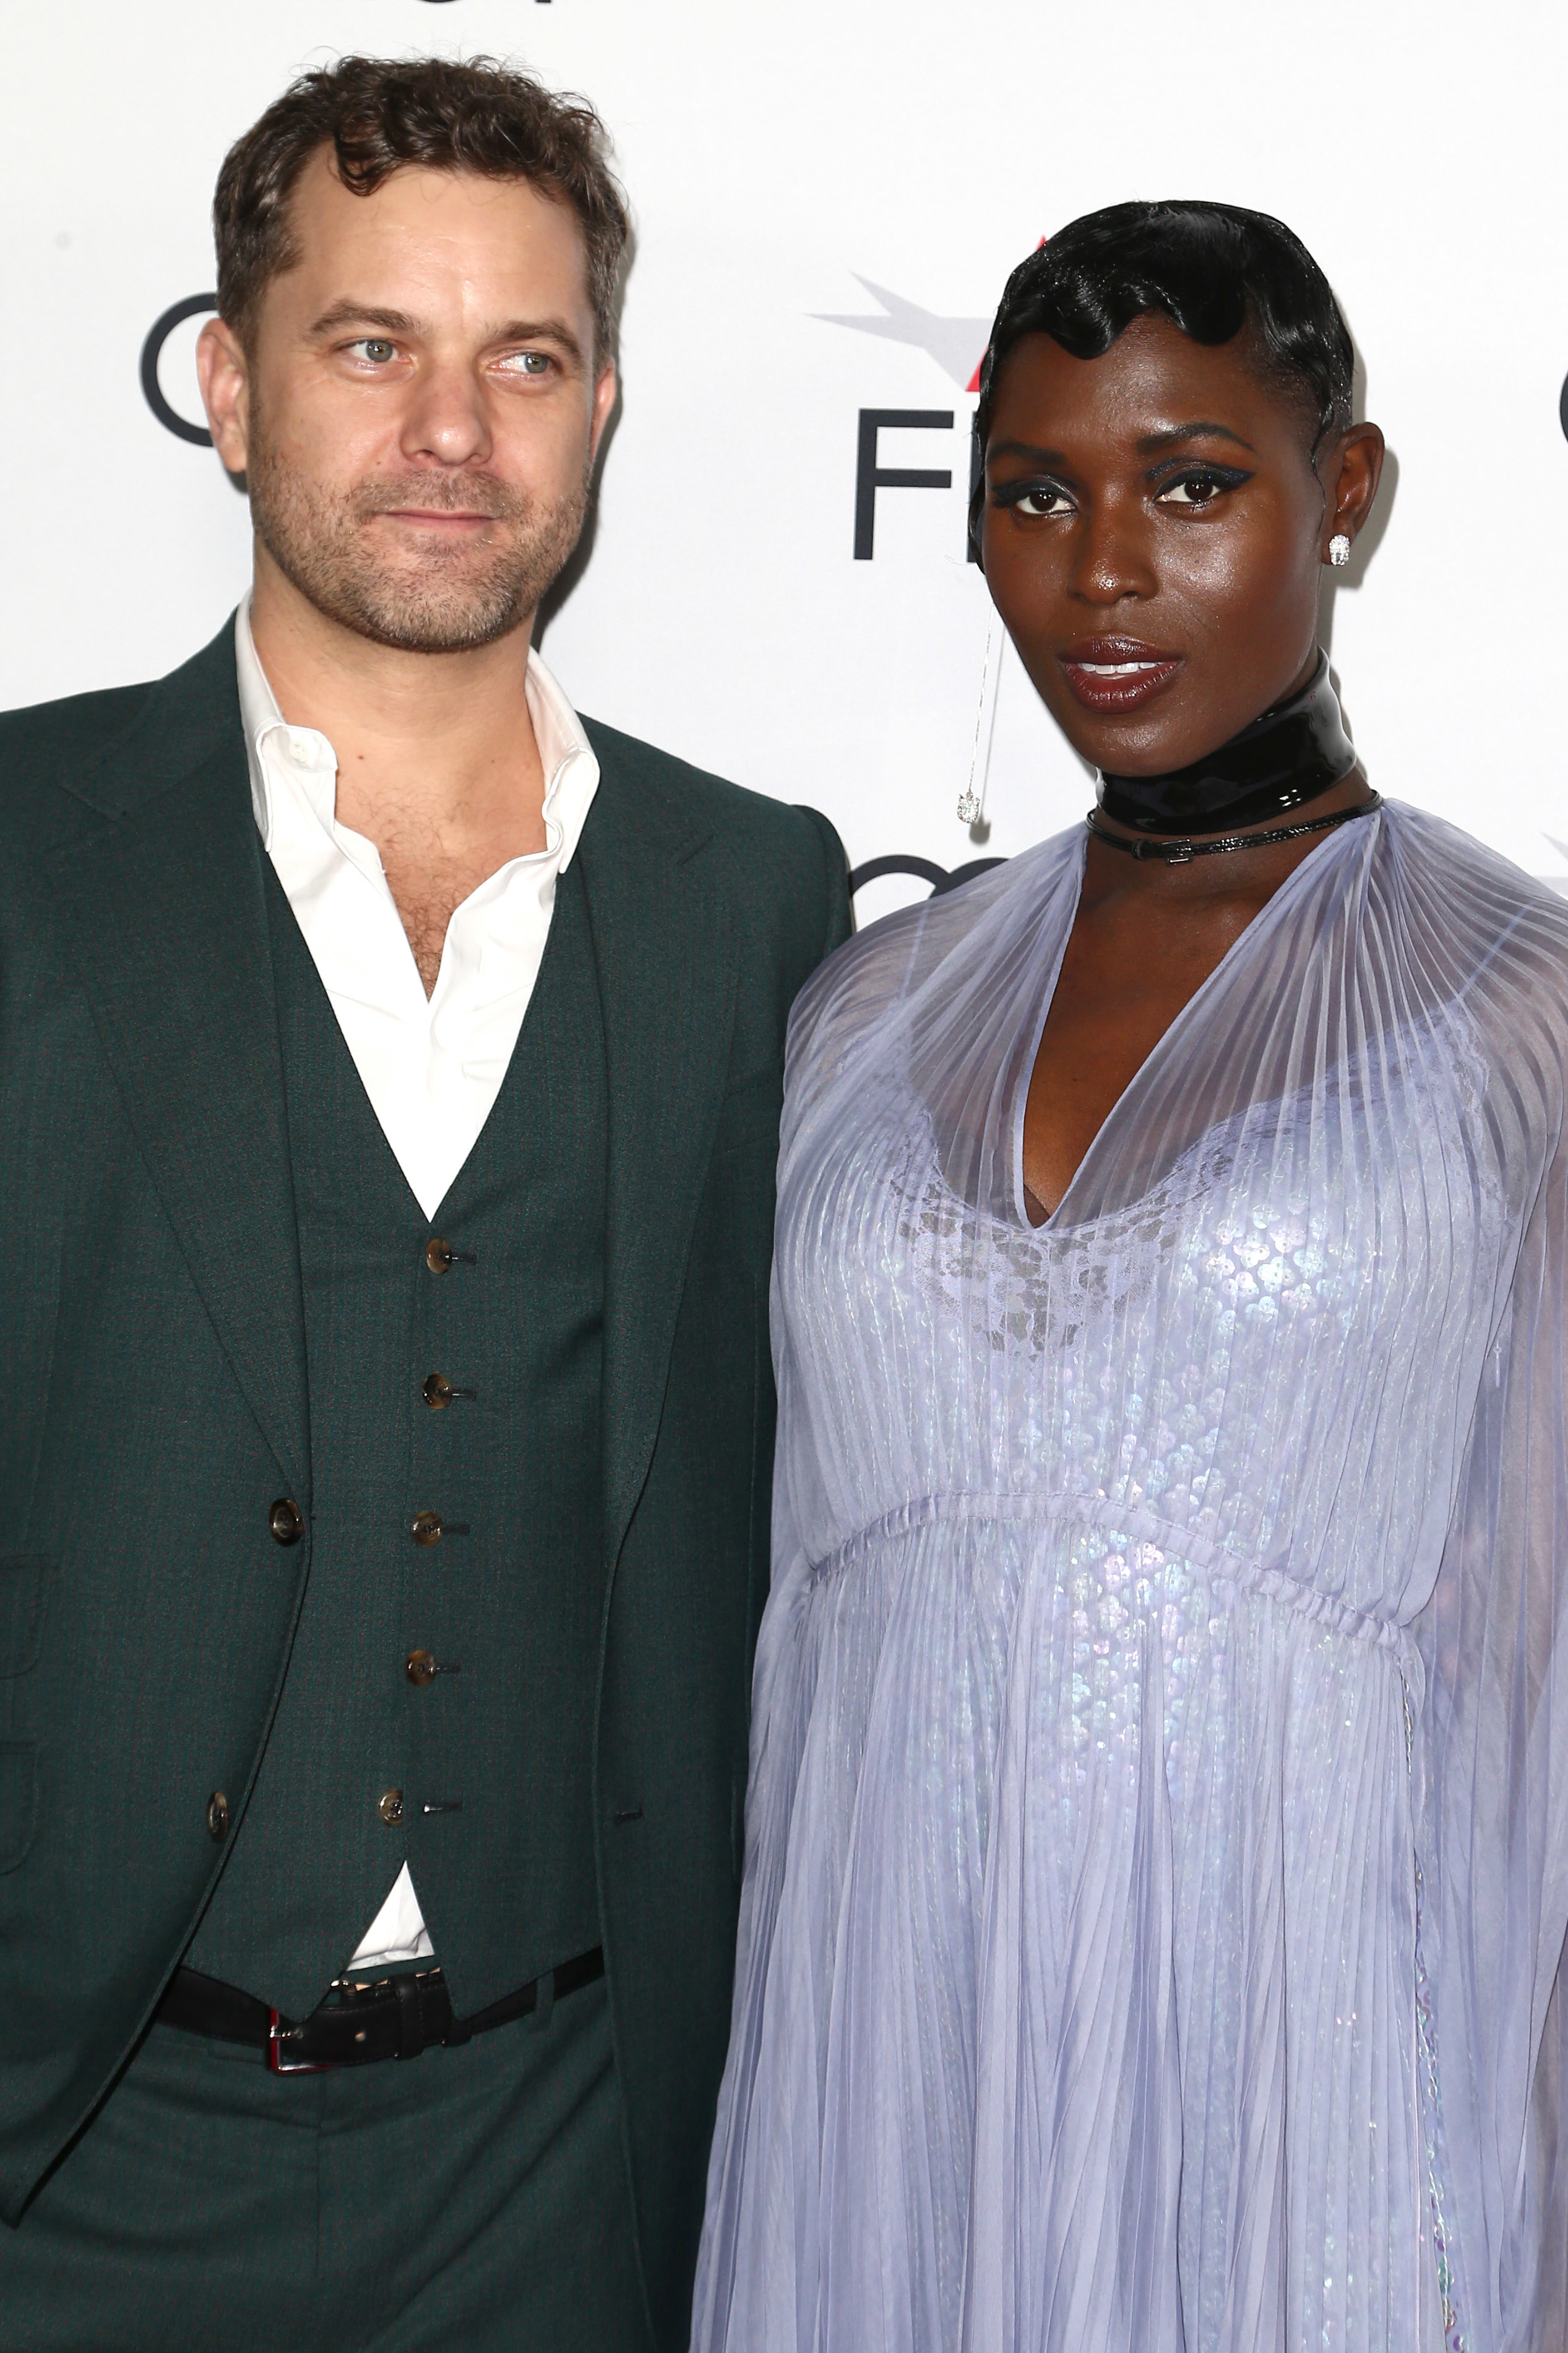 Joshua Jackson and Jodie Turner-Smith are photographed at an event in 2019